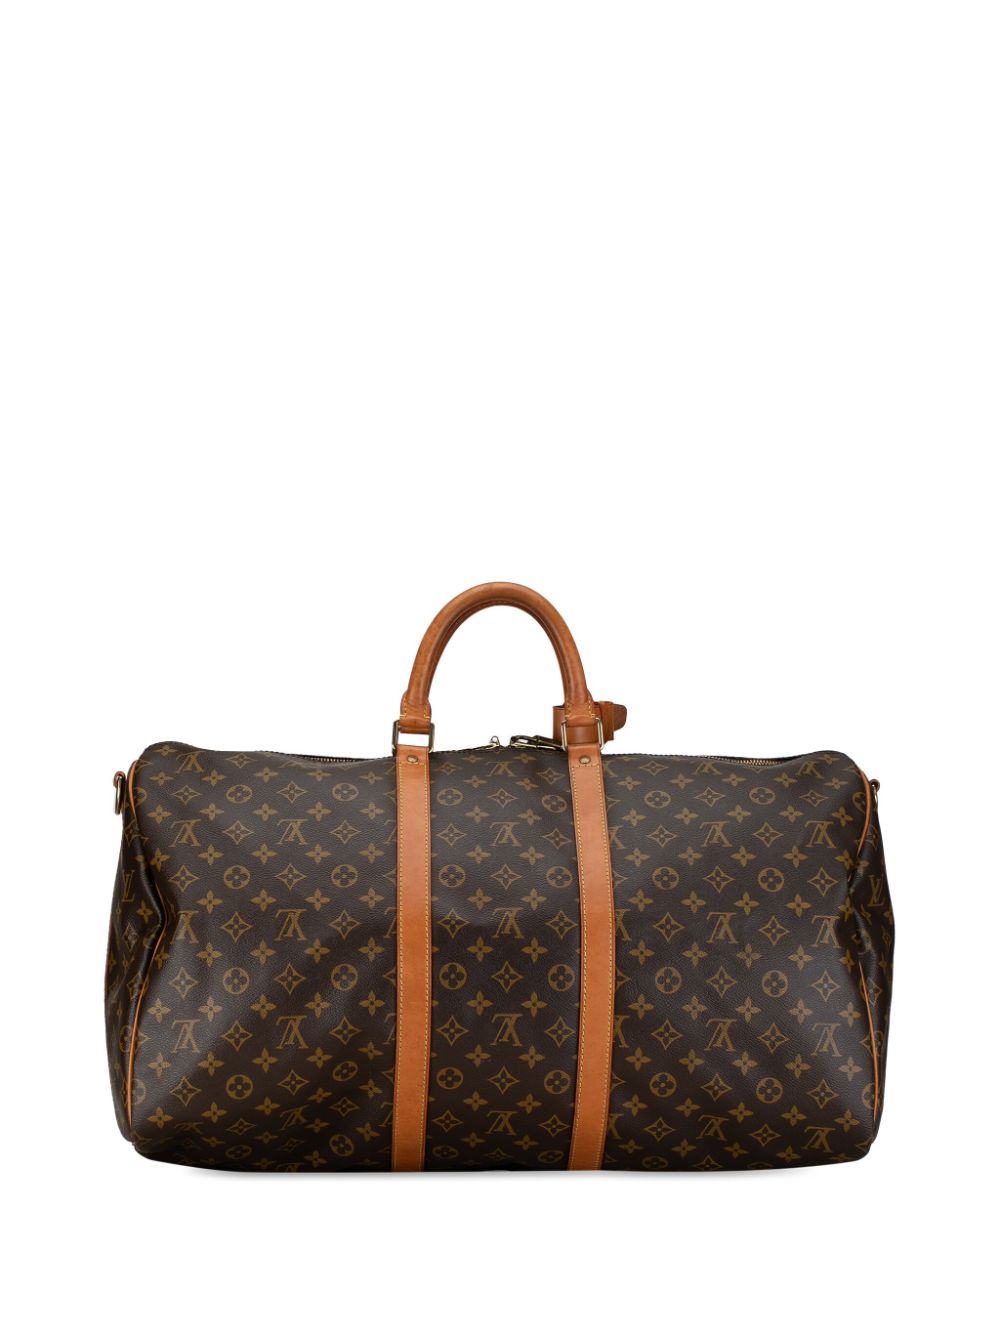 Louis Vuitton Pre-Owned 1995 Monogram Keepall Bandouliere 55 travel bag - Bruin